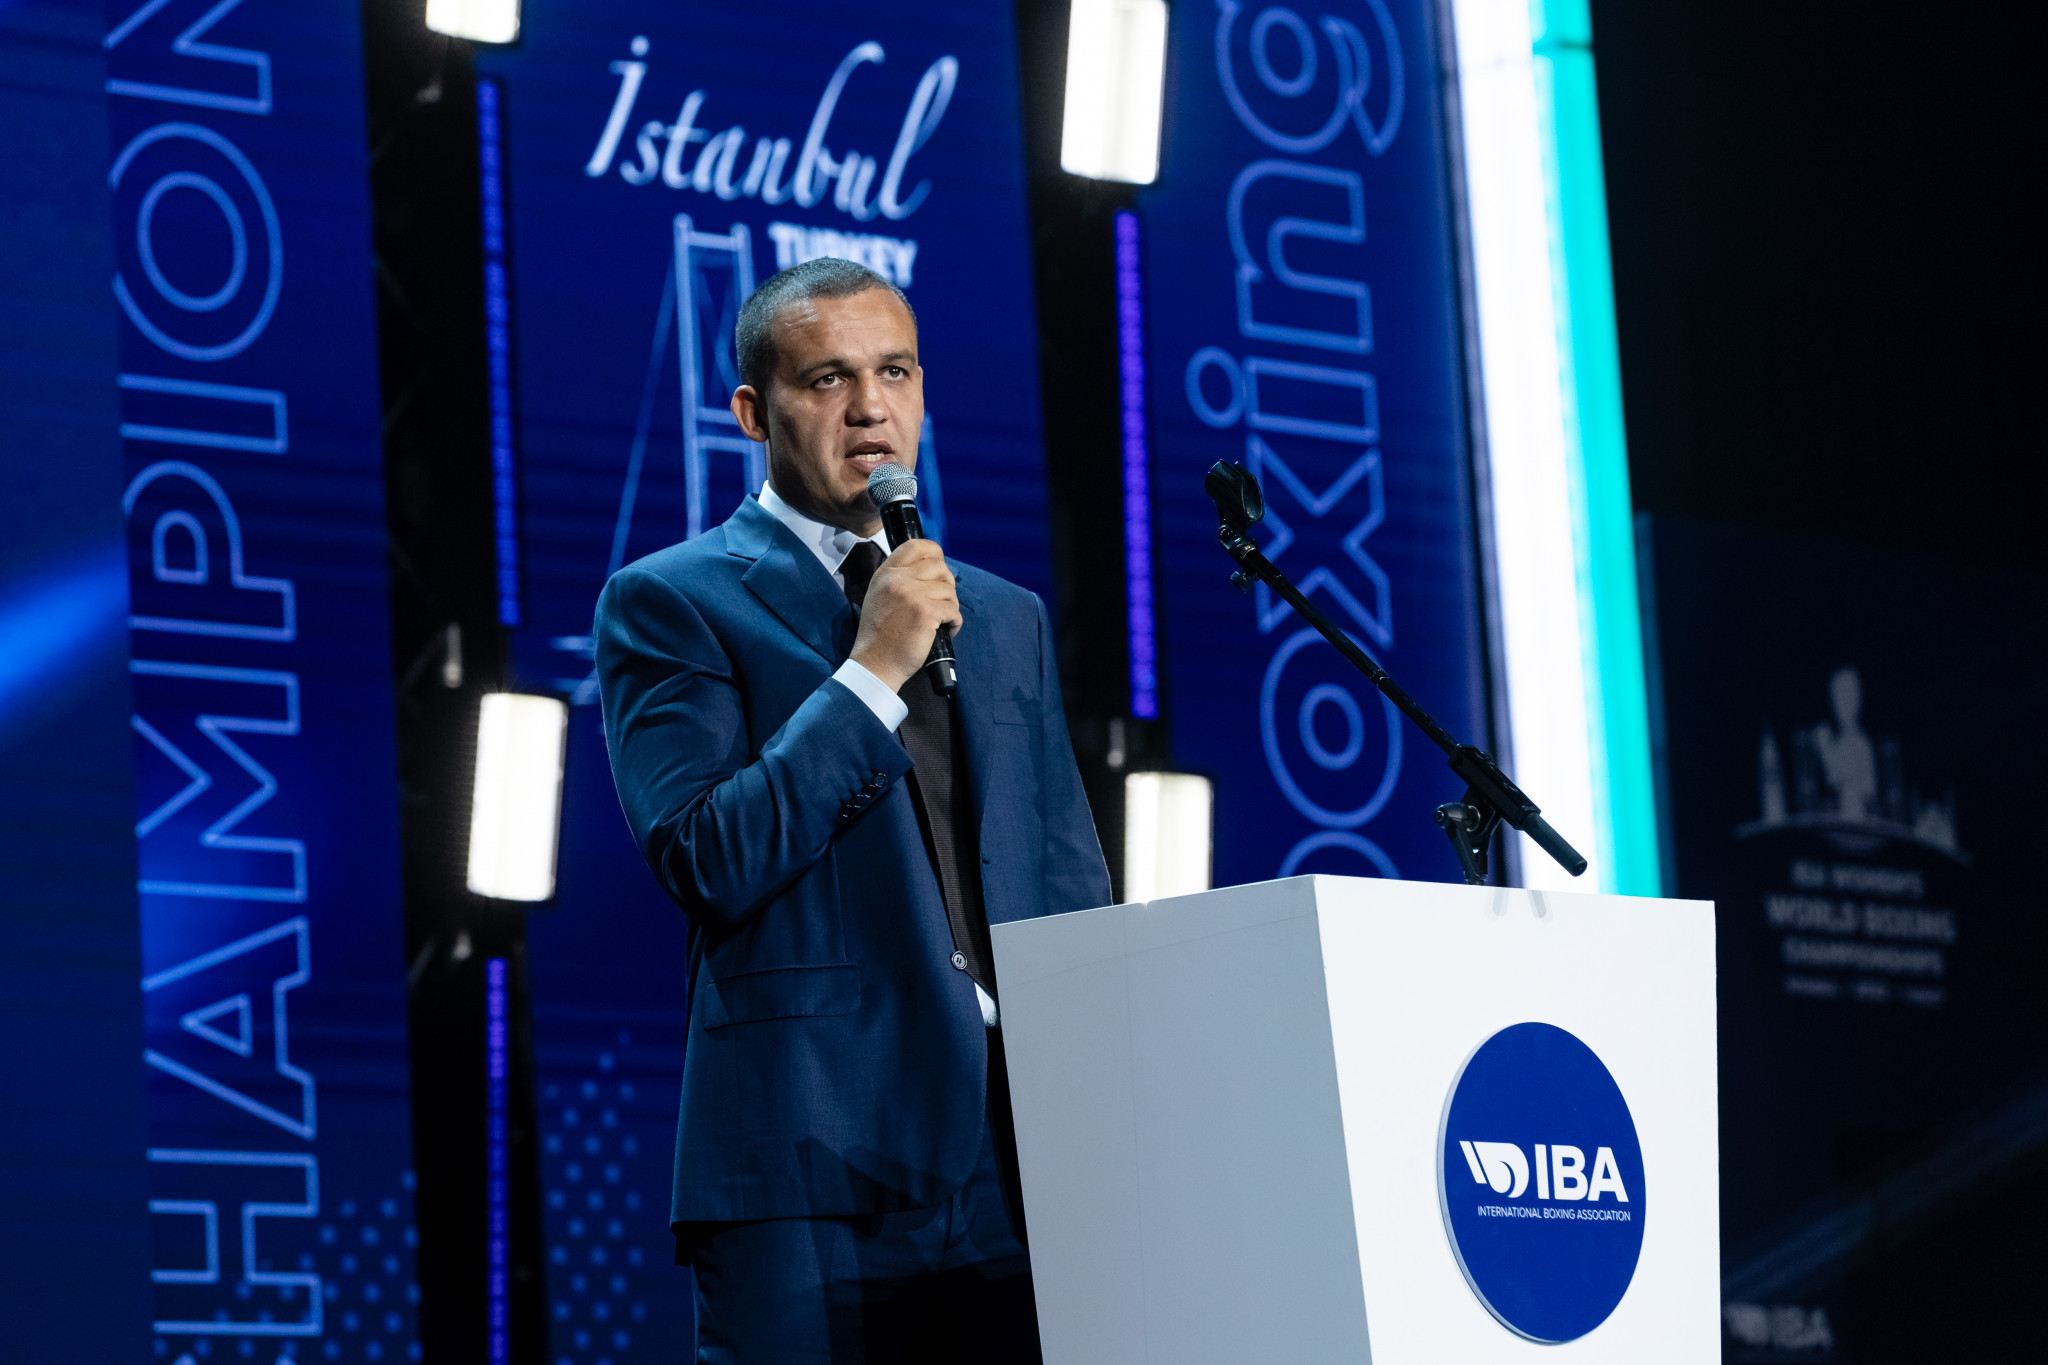 IBA President Umar Kremlev has been forced to defend his organisation after the IOC again expressed doubts over its governance and financial stability ©IBA